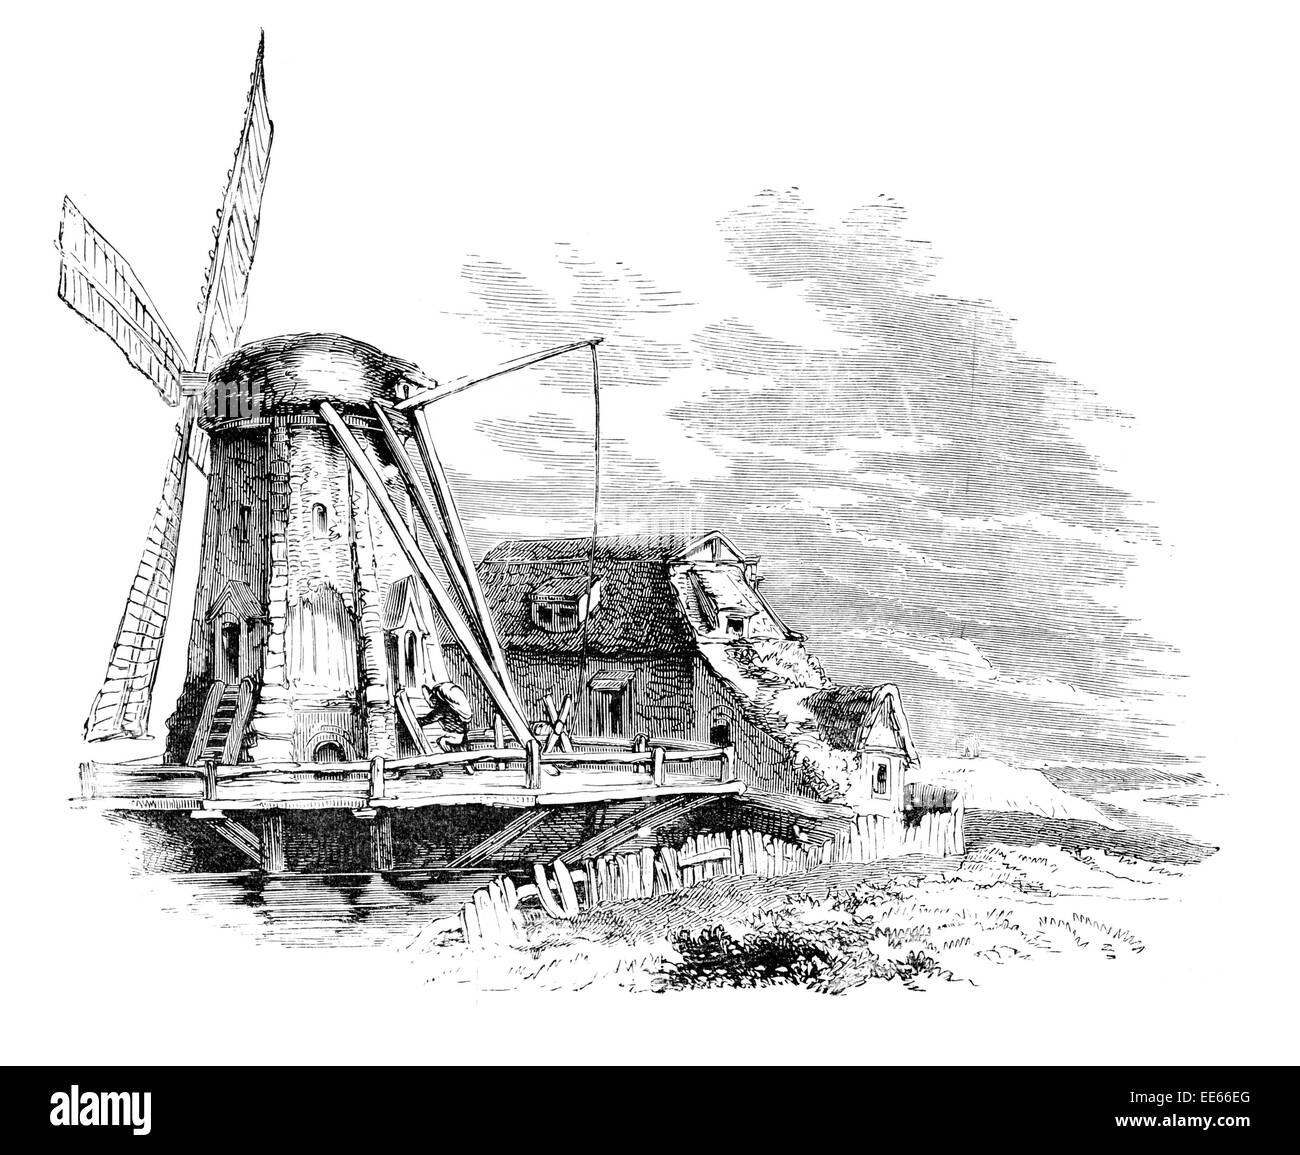 the mill rembrandt